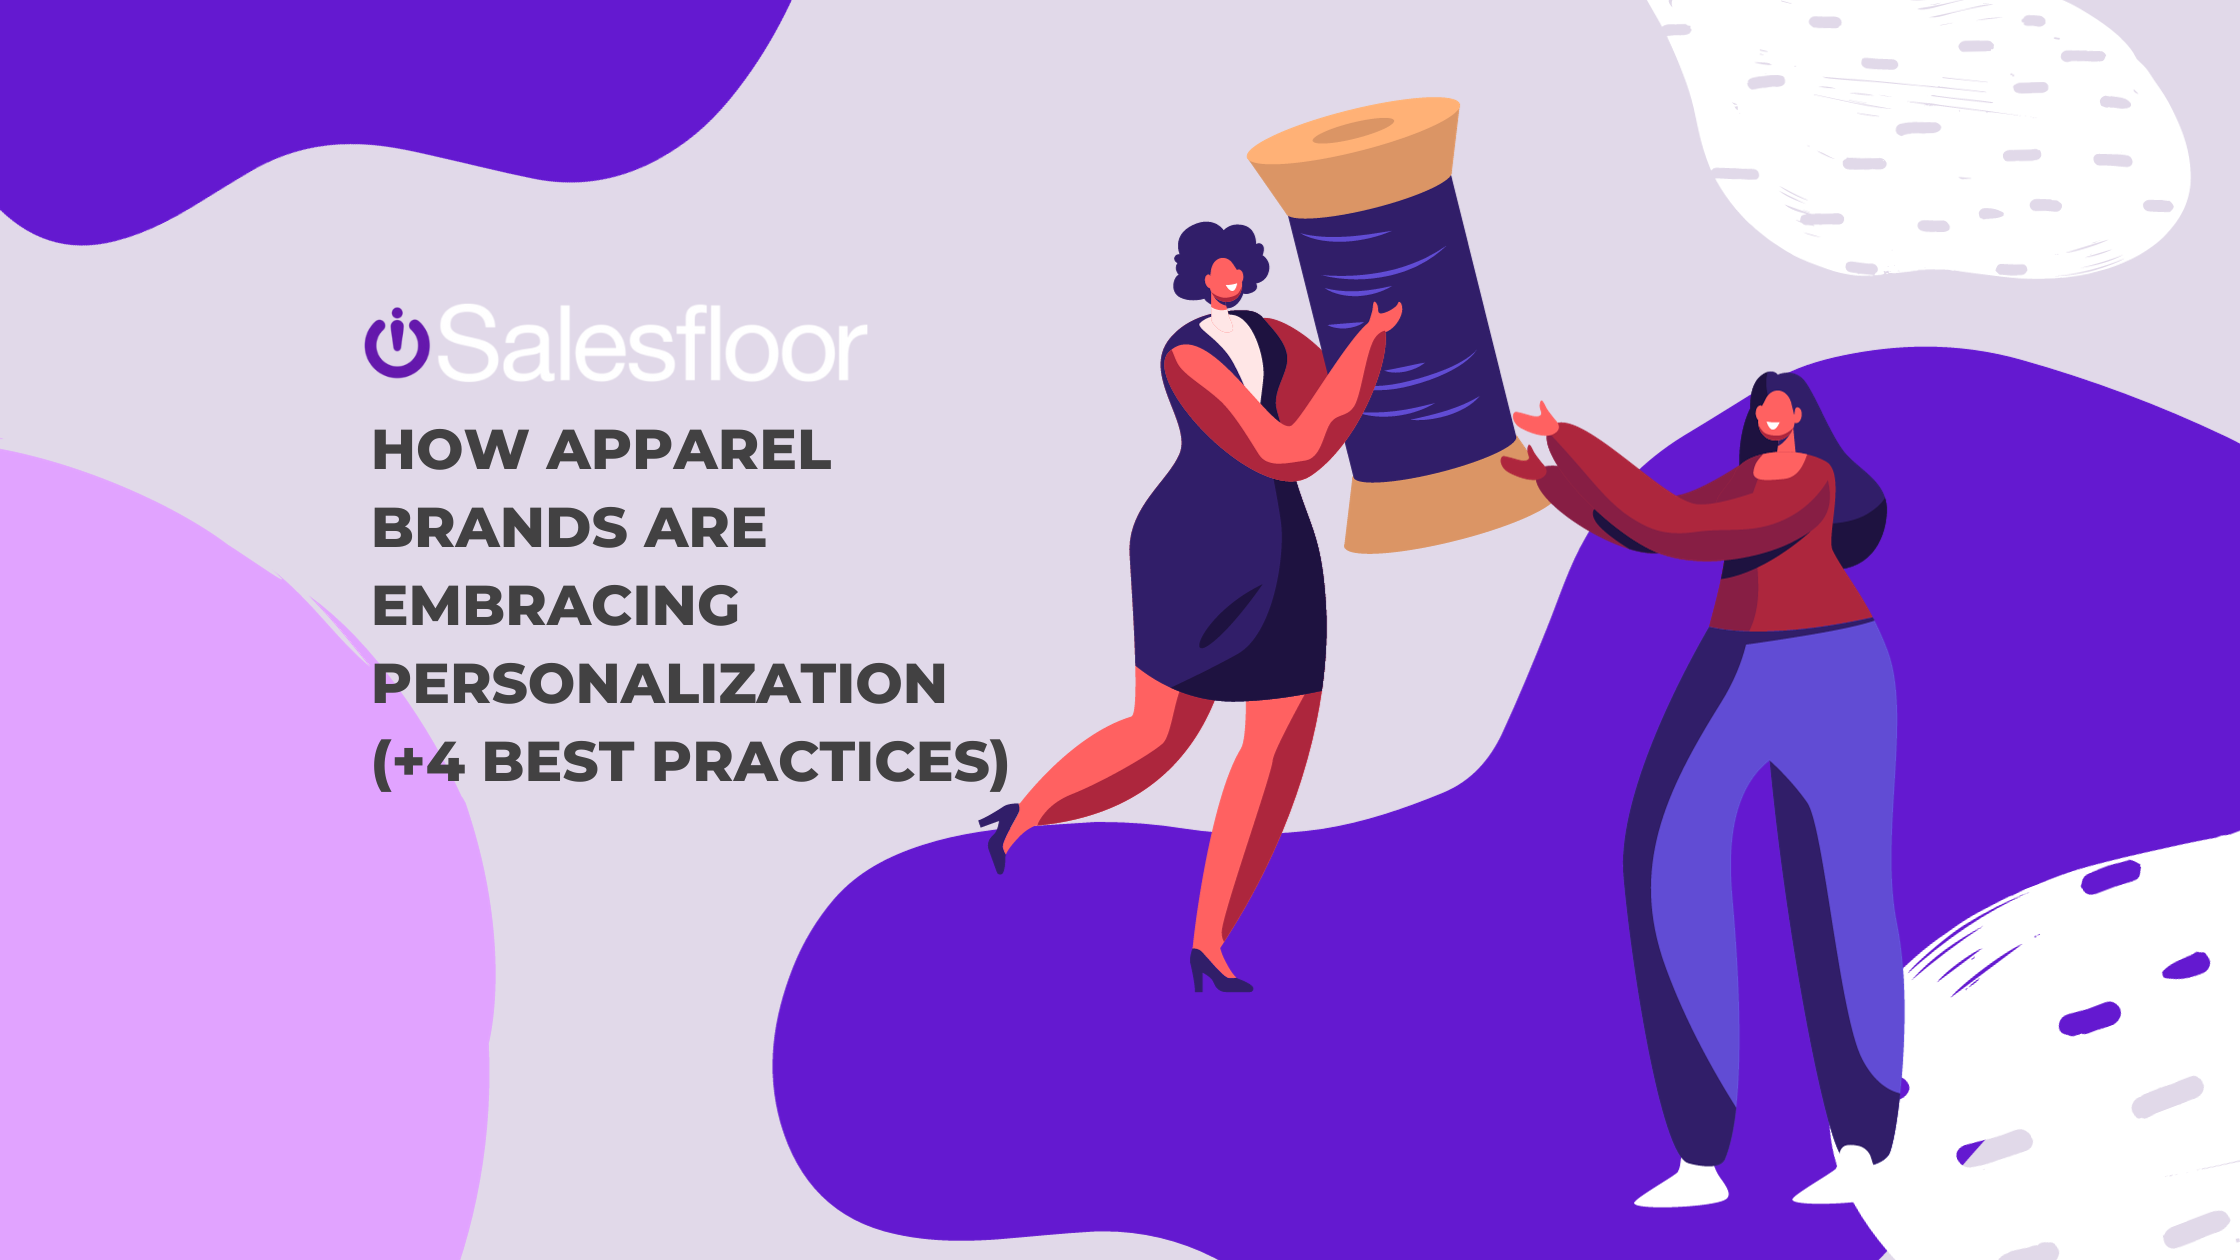 How Apparel Brands are Embracing Personalization (+4 Best Practices)